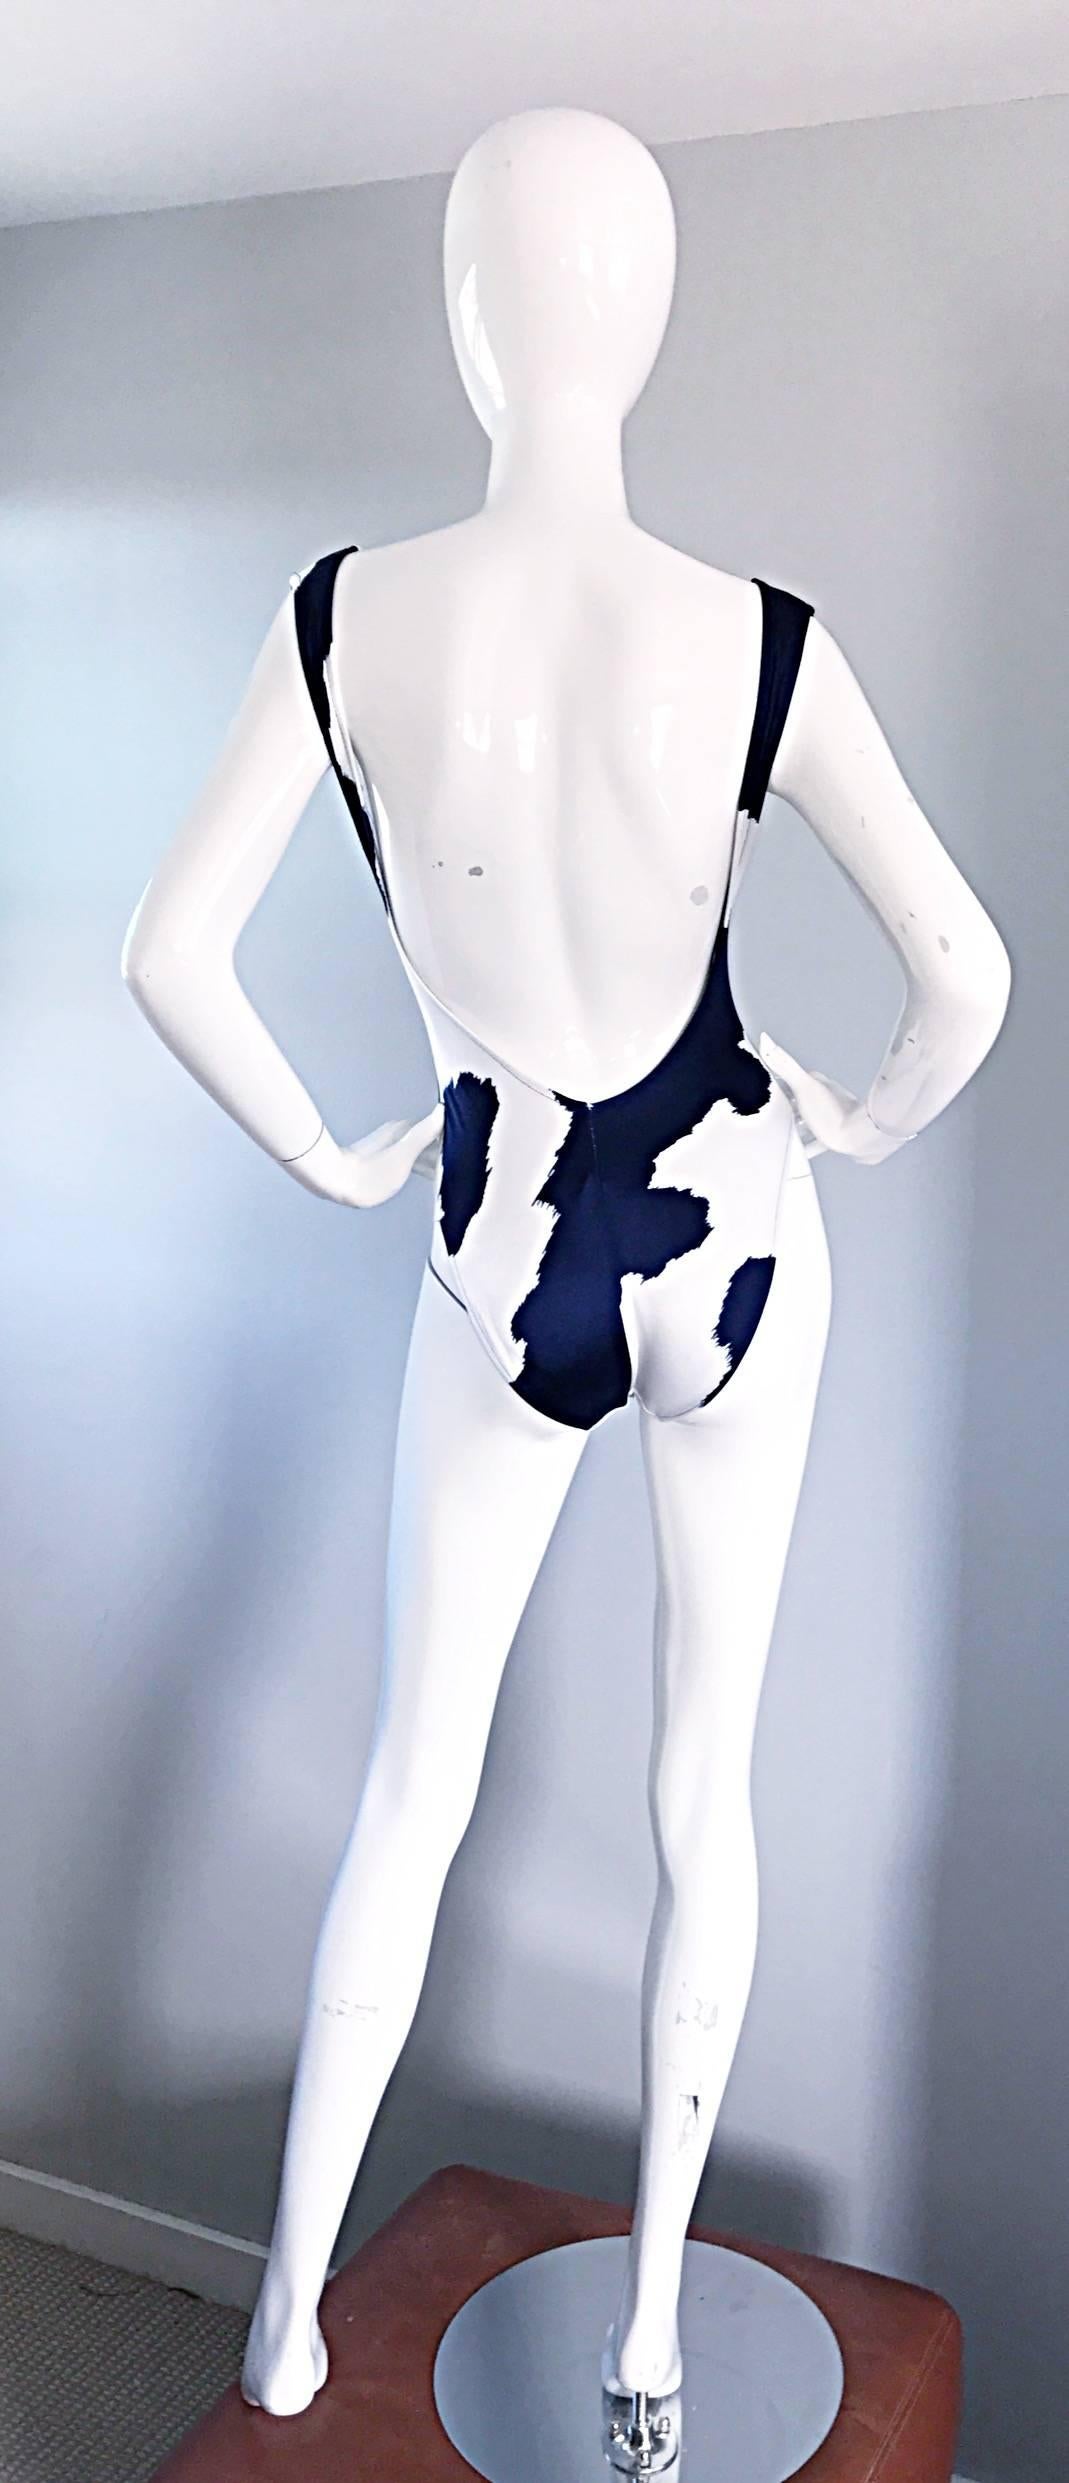 Black Amazing Bill BLASS Navy Blue and White Plunging One Piece Swimsuit Bodysuit